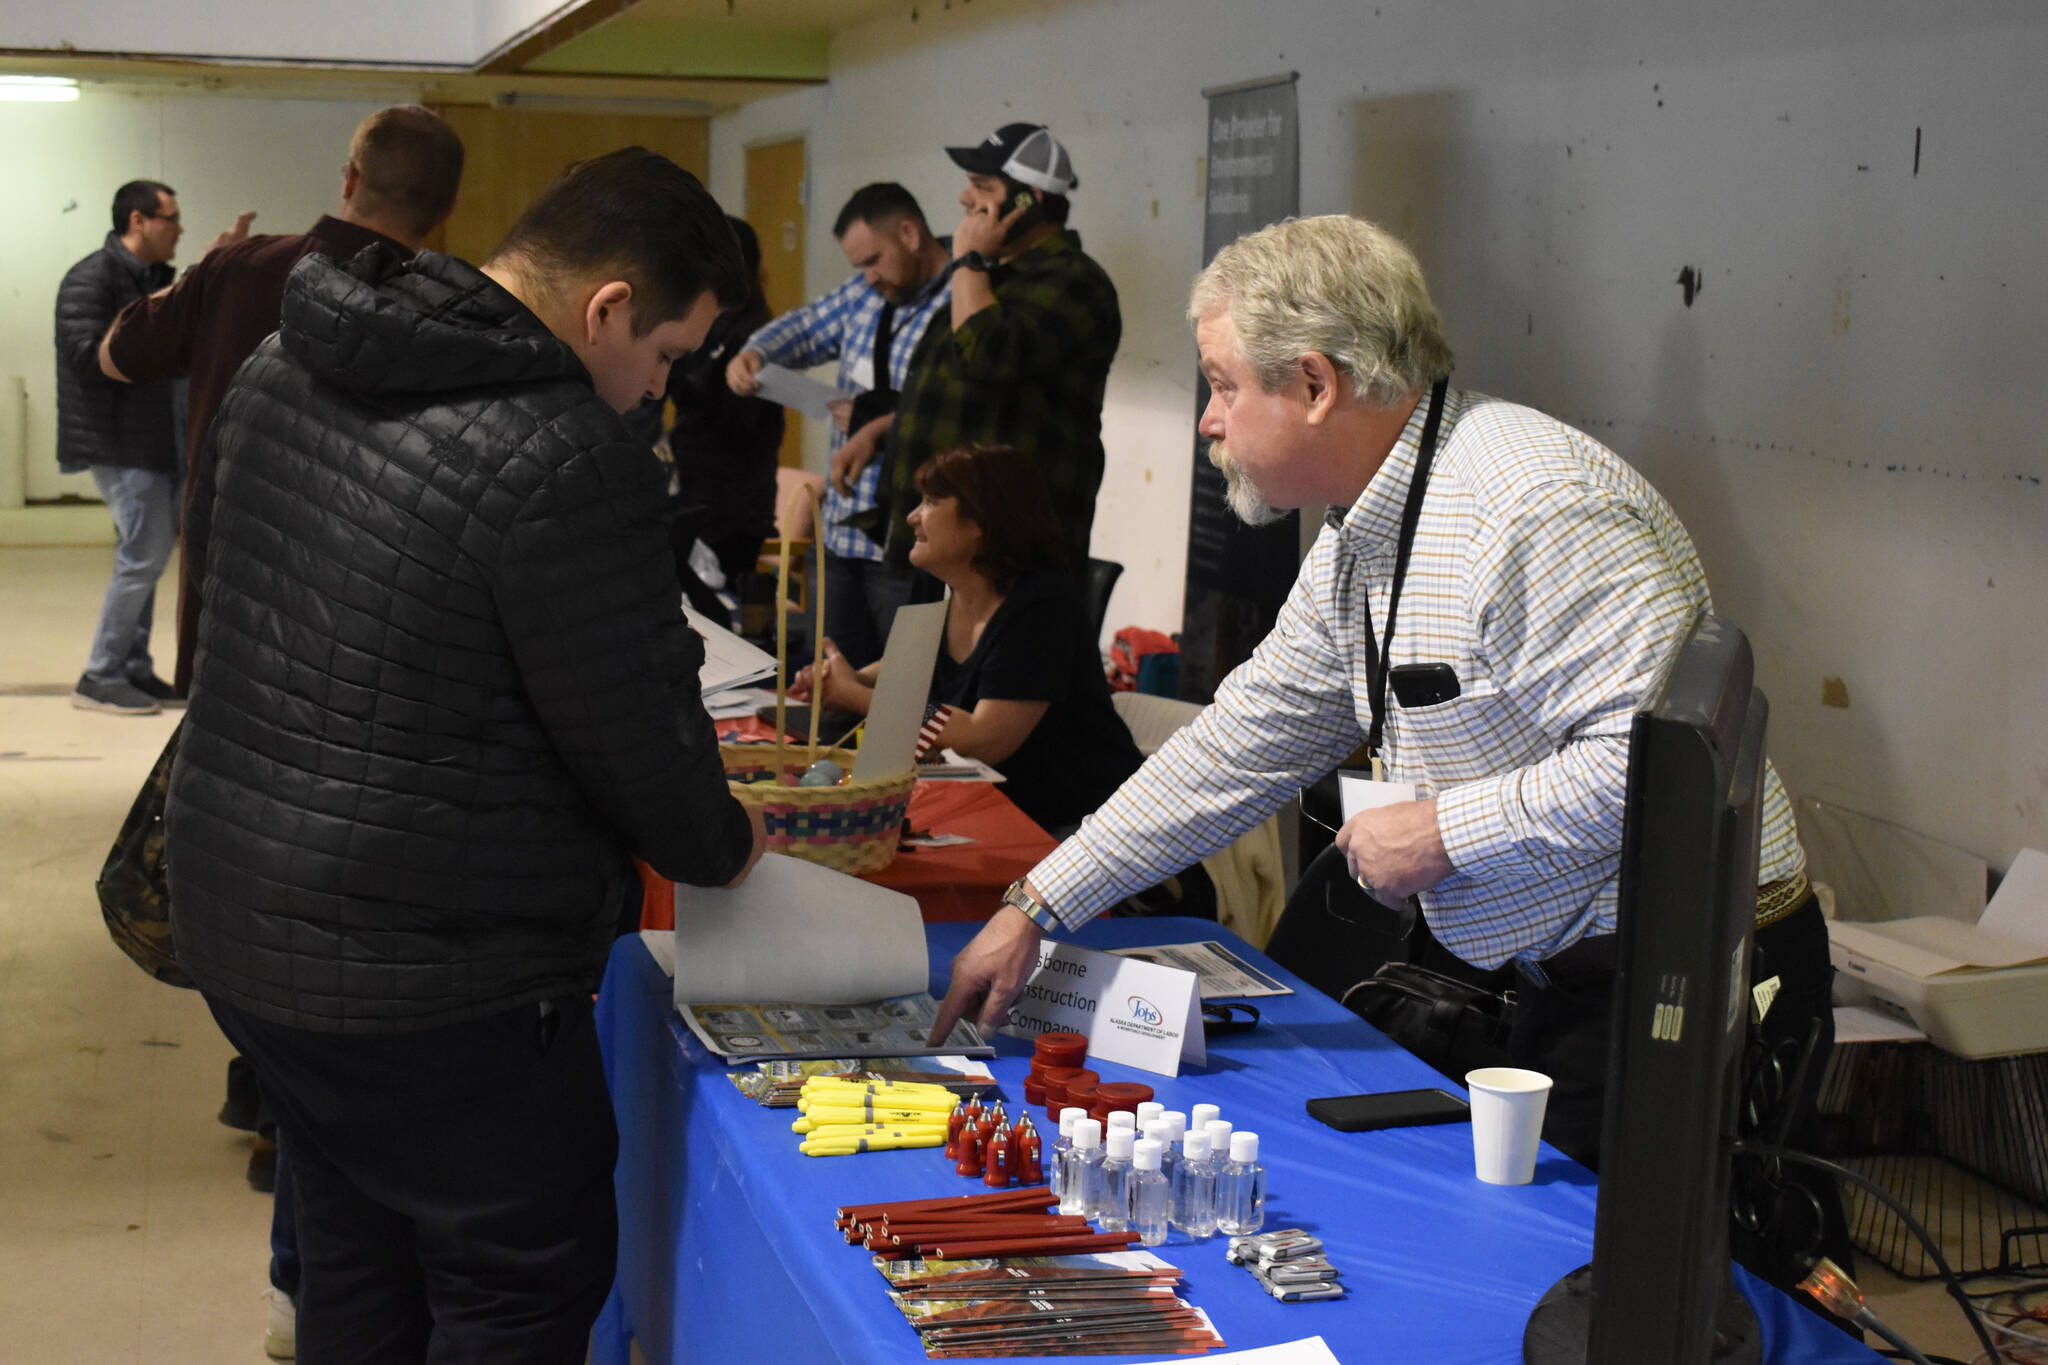 Randy Barnes, vice president of Alaska Building at Osborne Construction Company, points to information about a job opening at the Kenai Peninsula Job and Career Fair on Thursday, April 6, 2023, at the Old Carrs Mall in Kenai, Alaska. (Jake Dye/Peninsula Clarion)